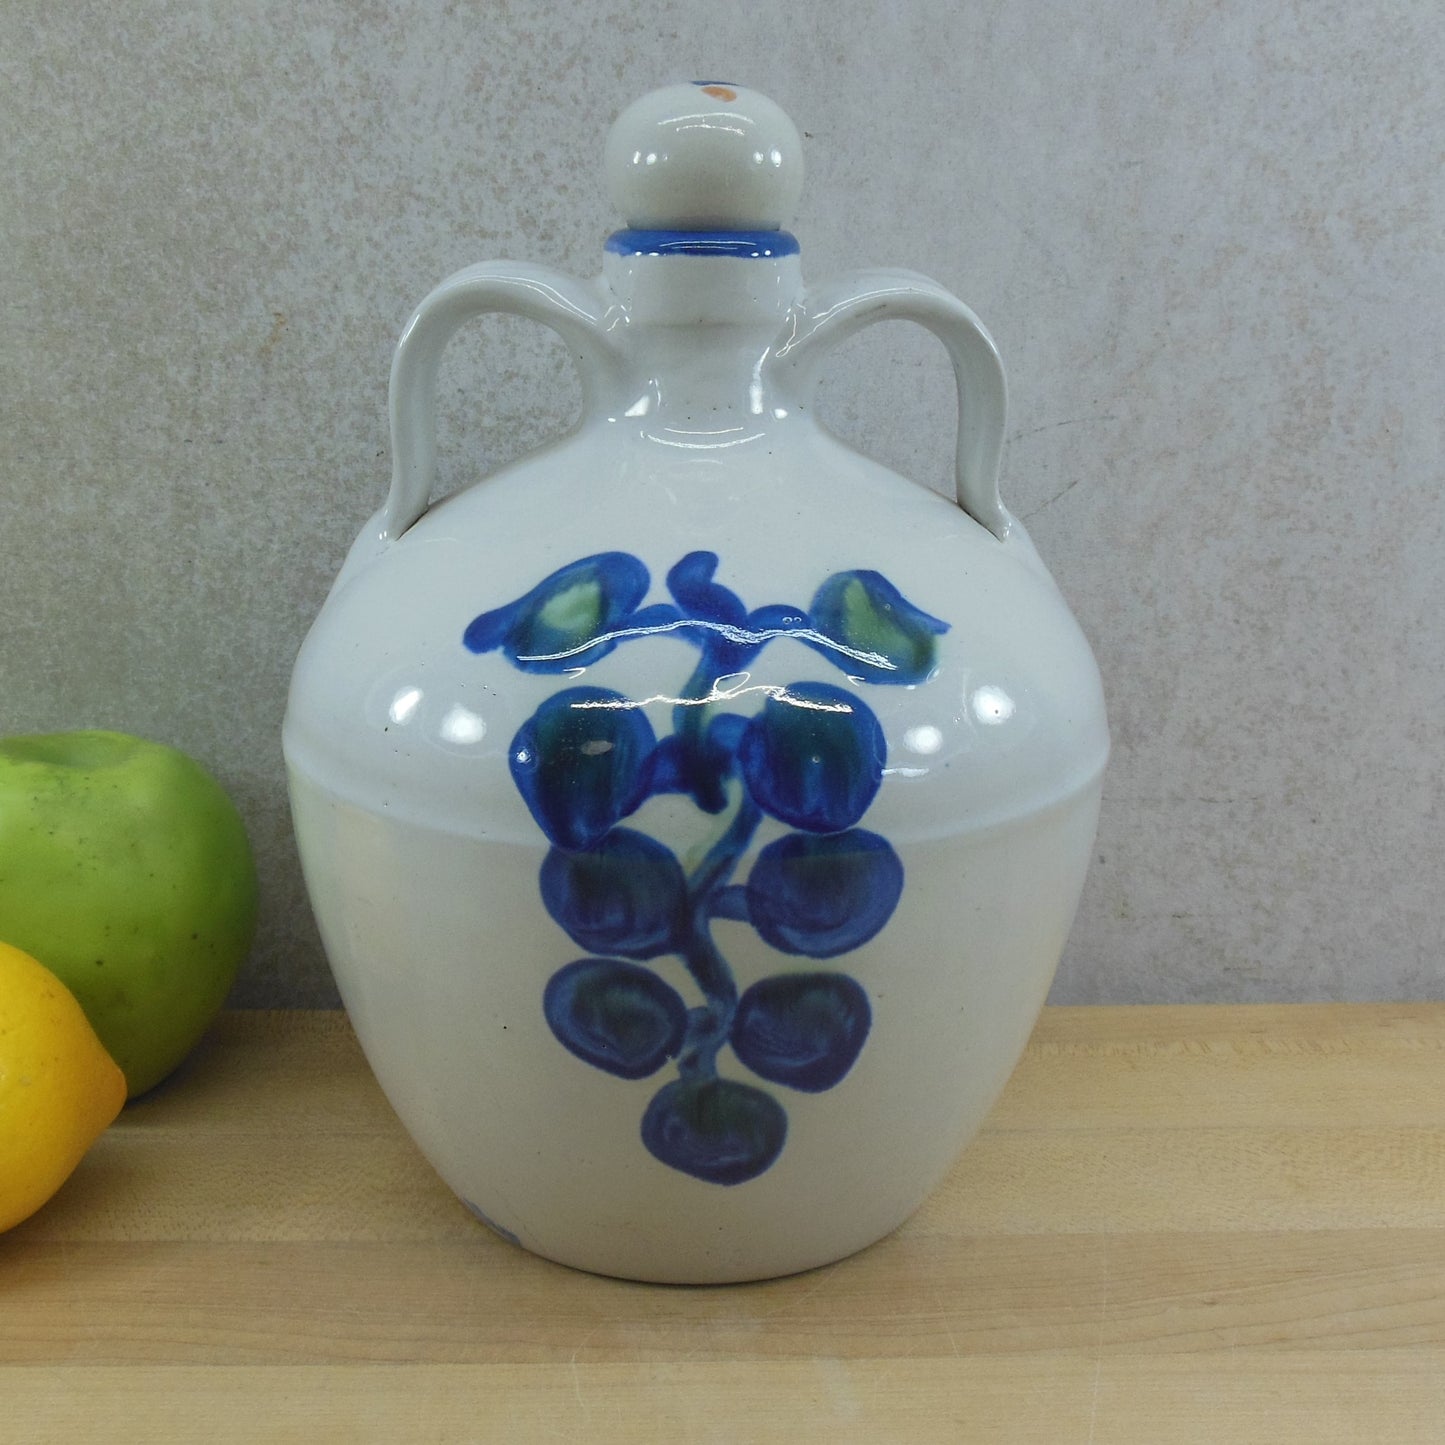 M.A. Hadley Pottery Sherry Jug Decanter